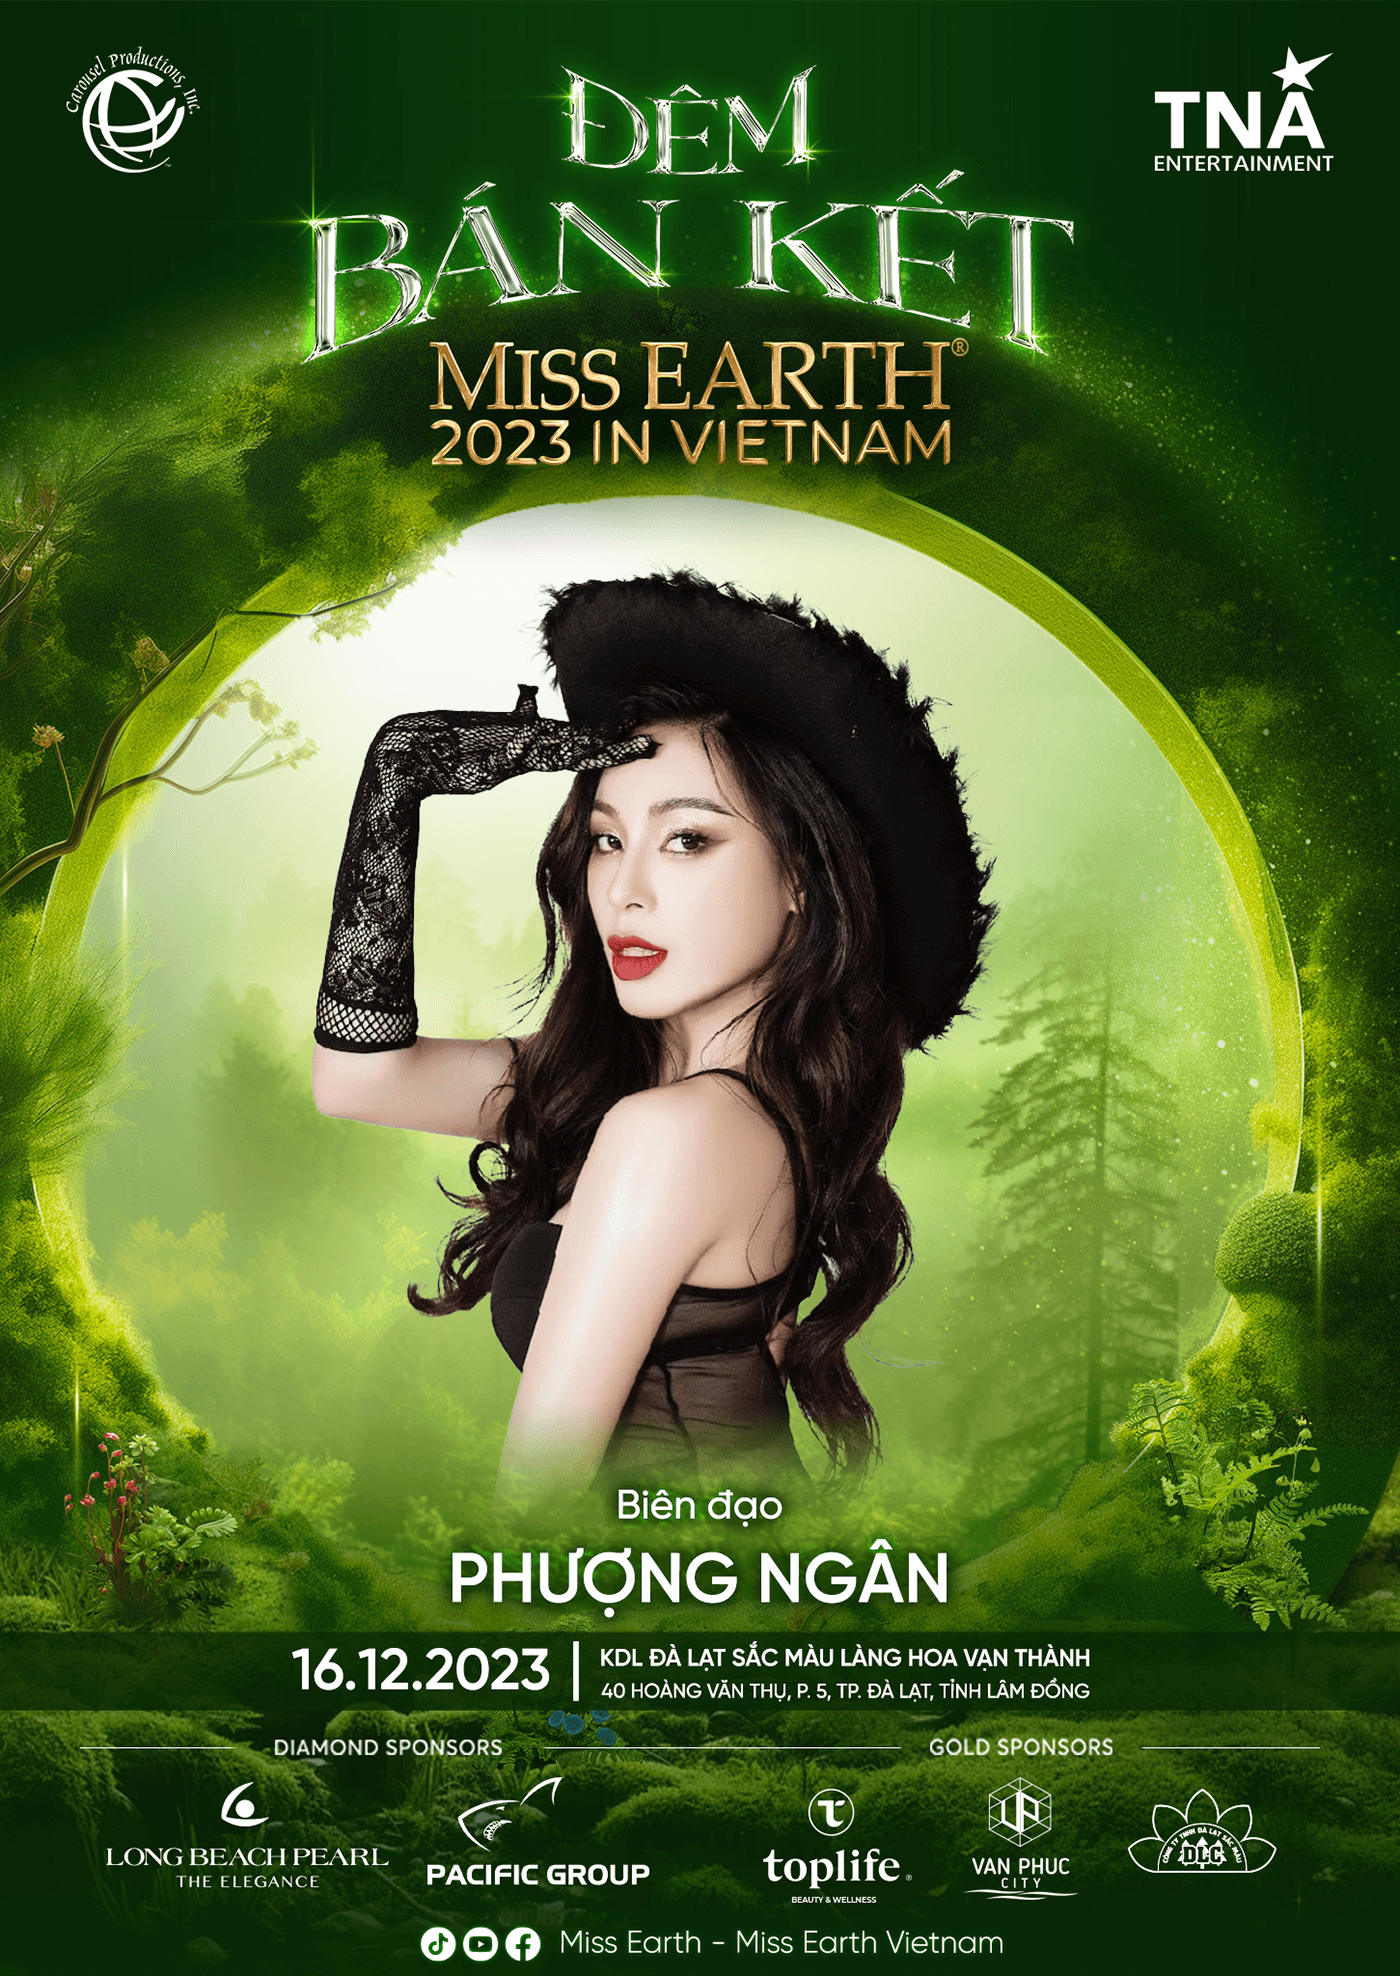 miss earth poster hoa hậu poster beauty pageant beauty queen